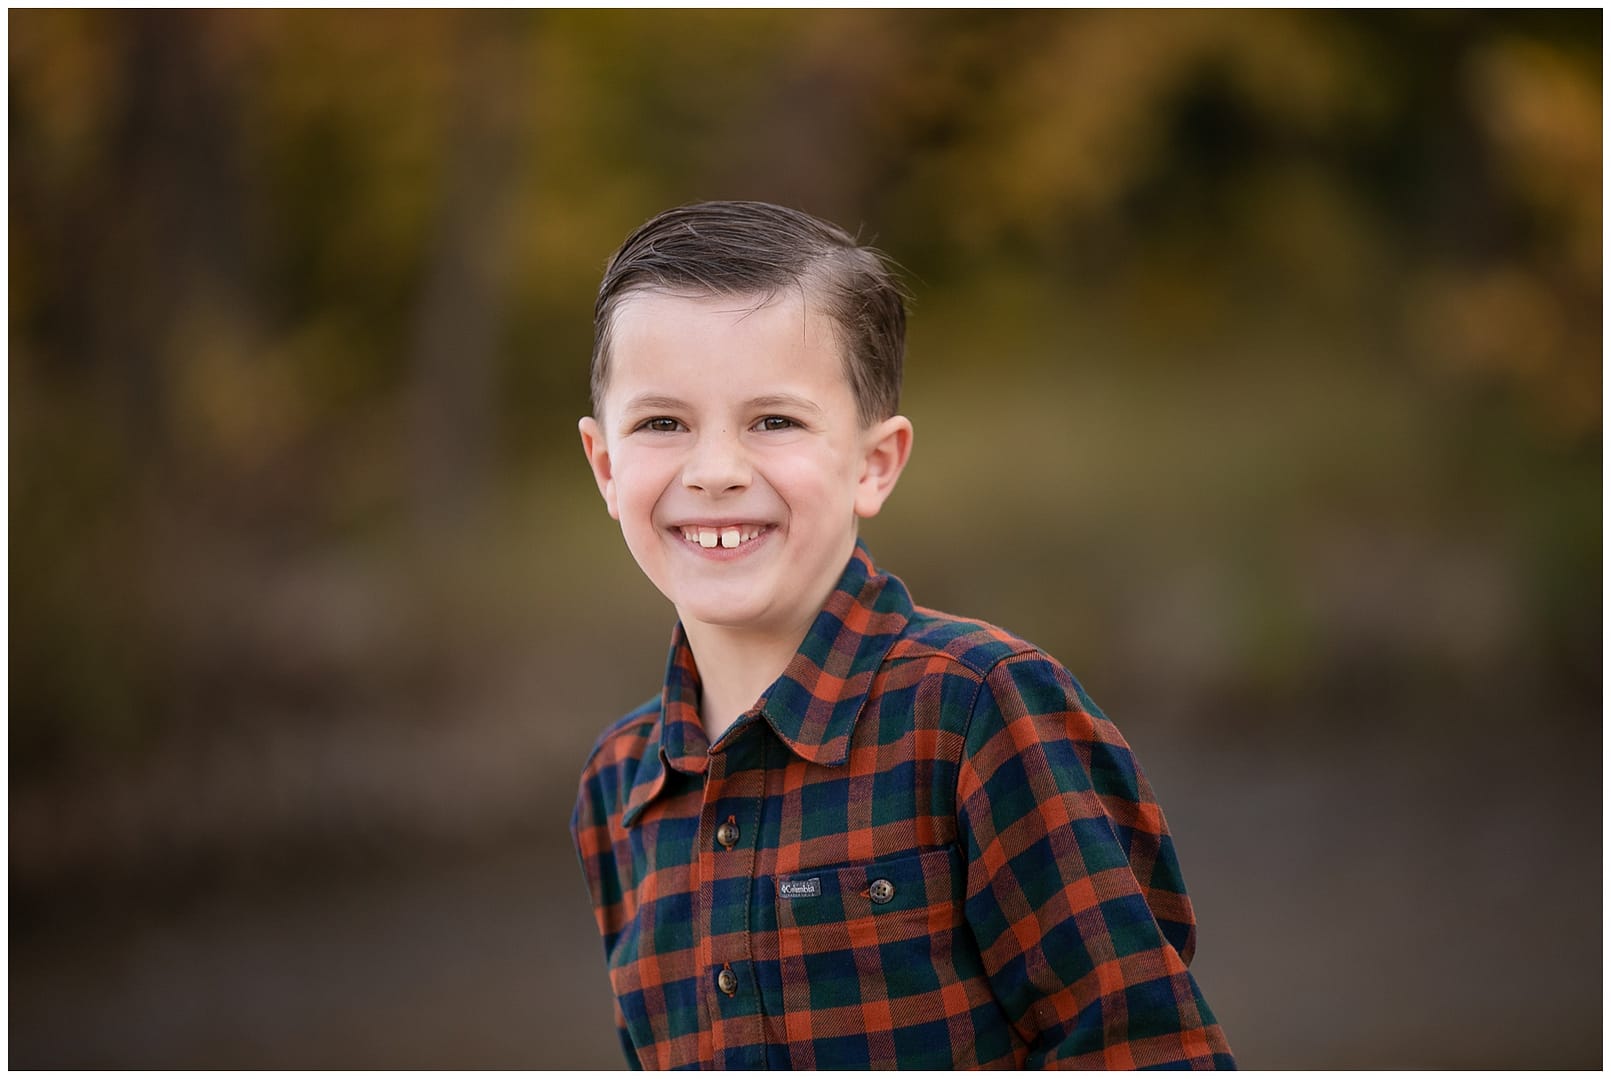 Boise child smiles for camera. Photos by Tiffany Hix Photography.